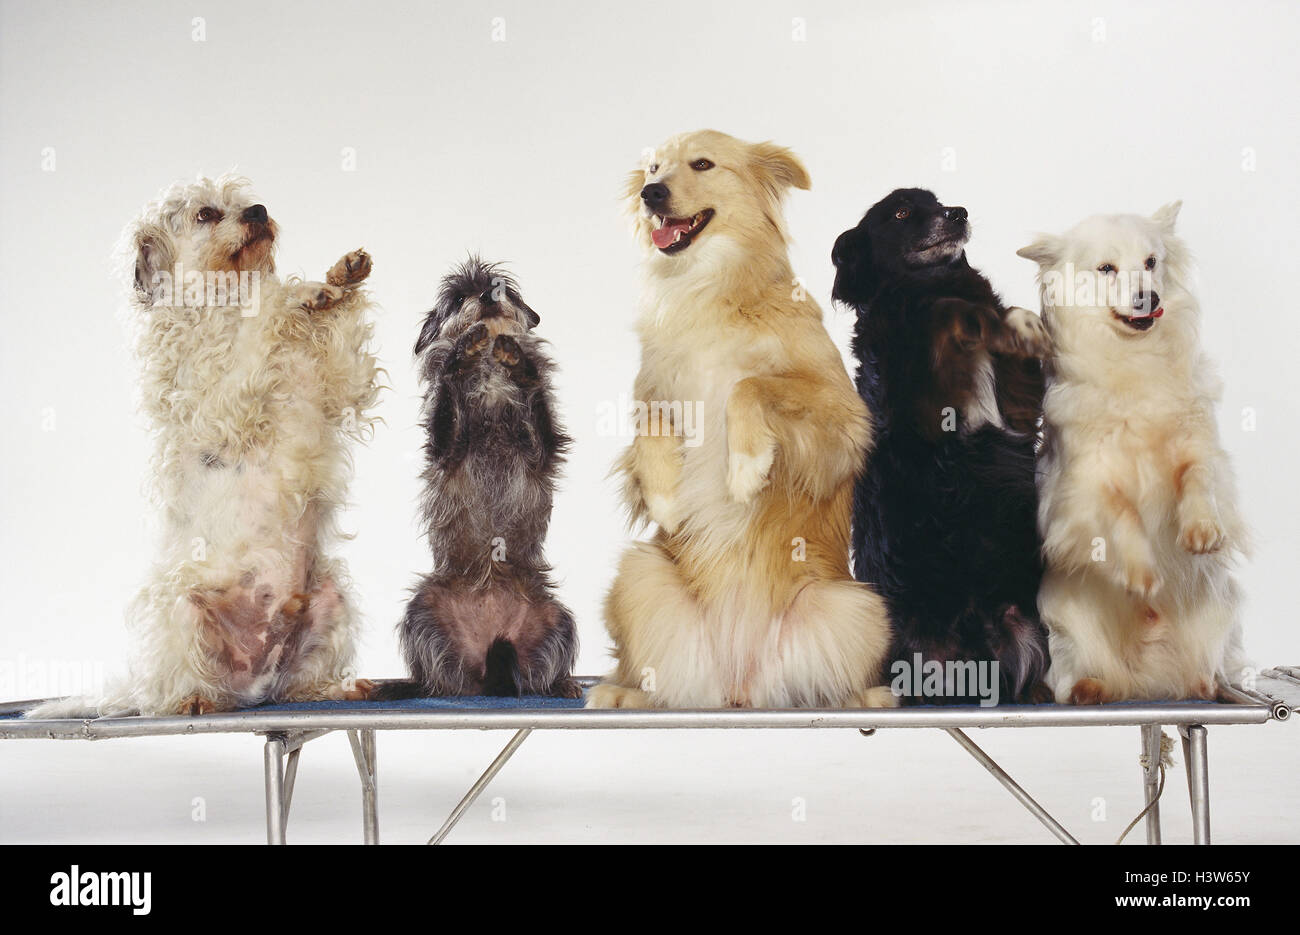 Dogs, five, 'little man make' mammals, doggy, Canidae, pet, hybrids, hybrid dogs, different, raised, sit, there beg, studio, cut outs Stock Photo